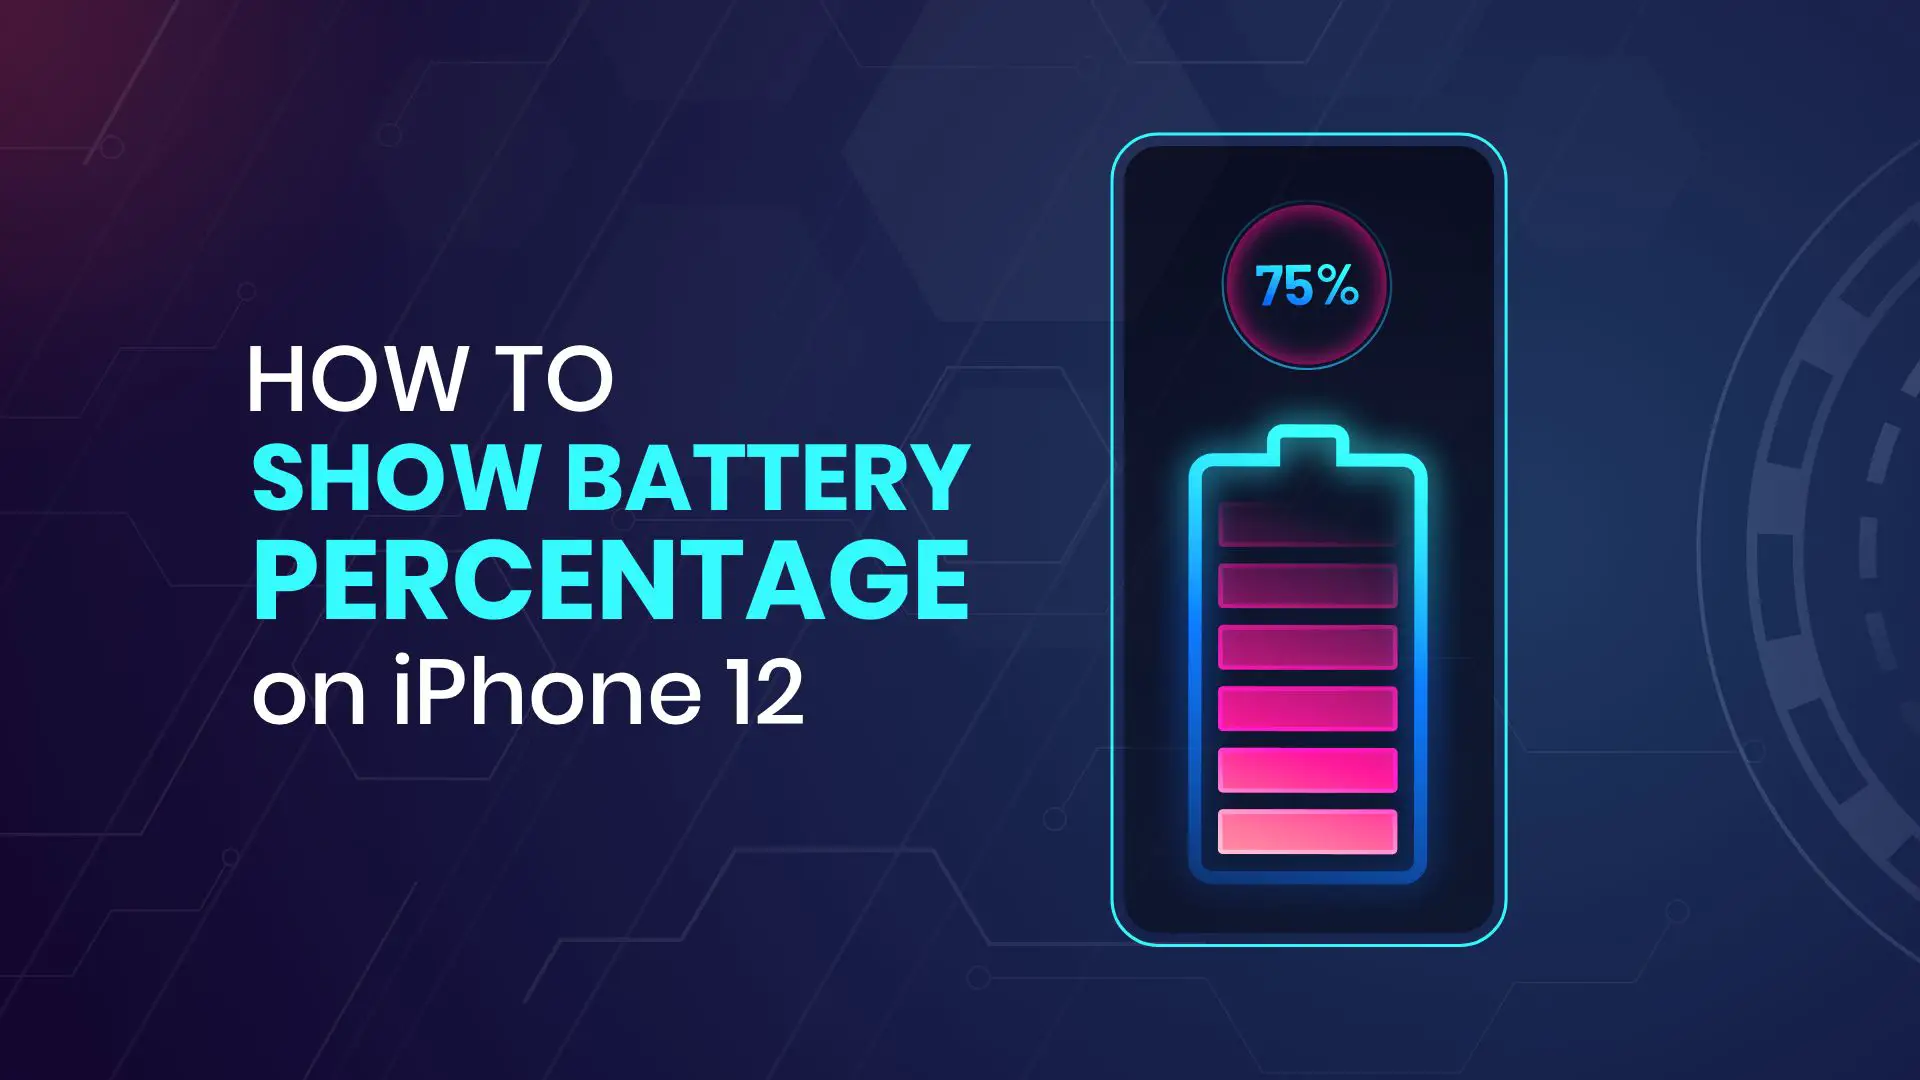 How to Show Battery Percentage on iPhone 12